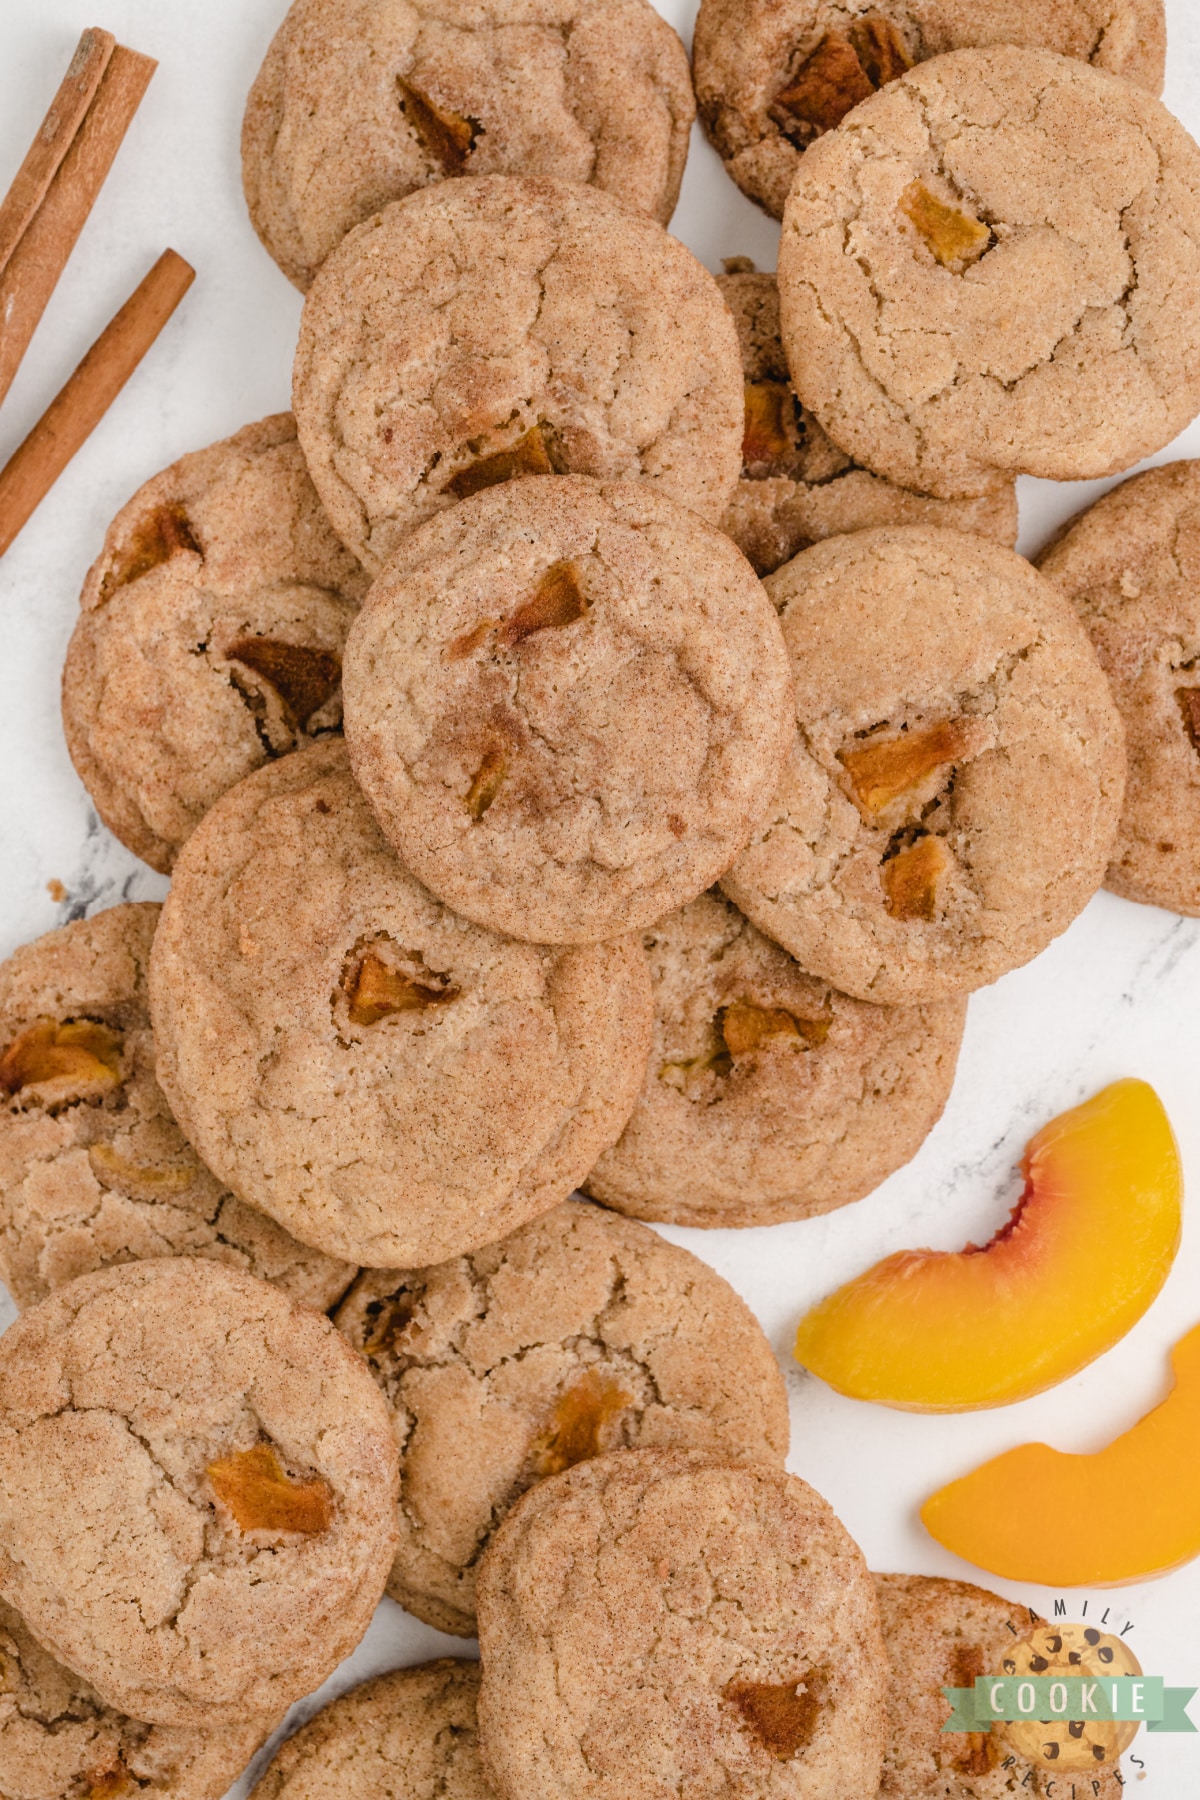 Cookies made with fresh peaches